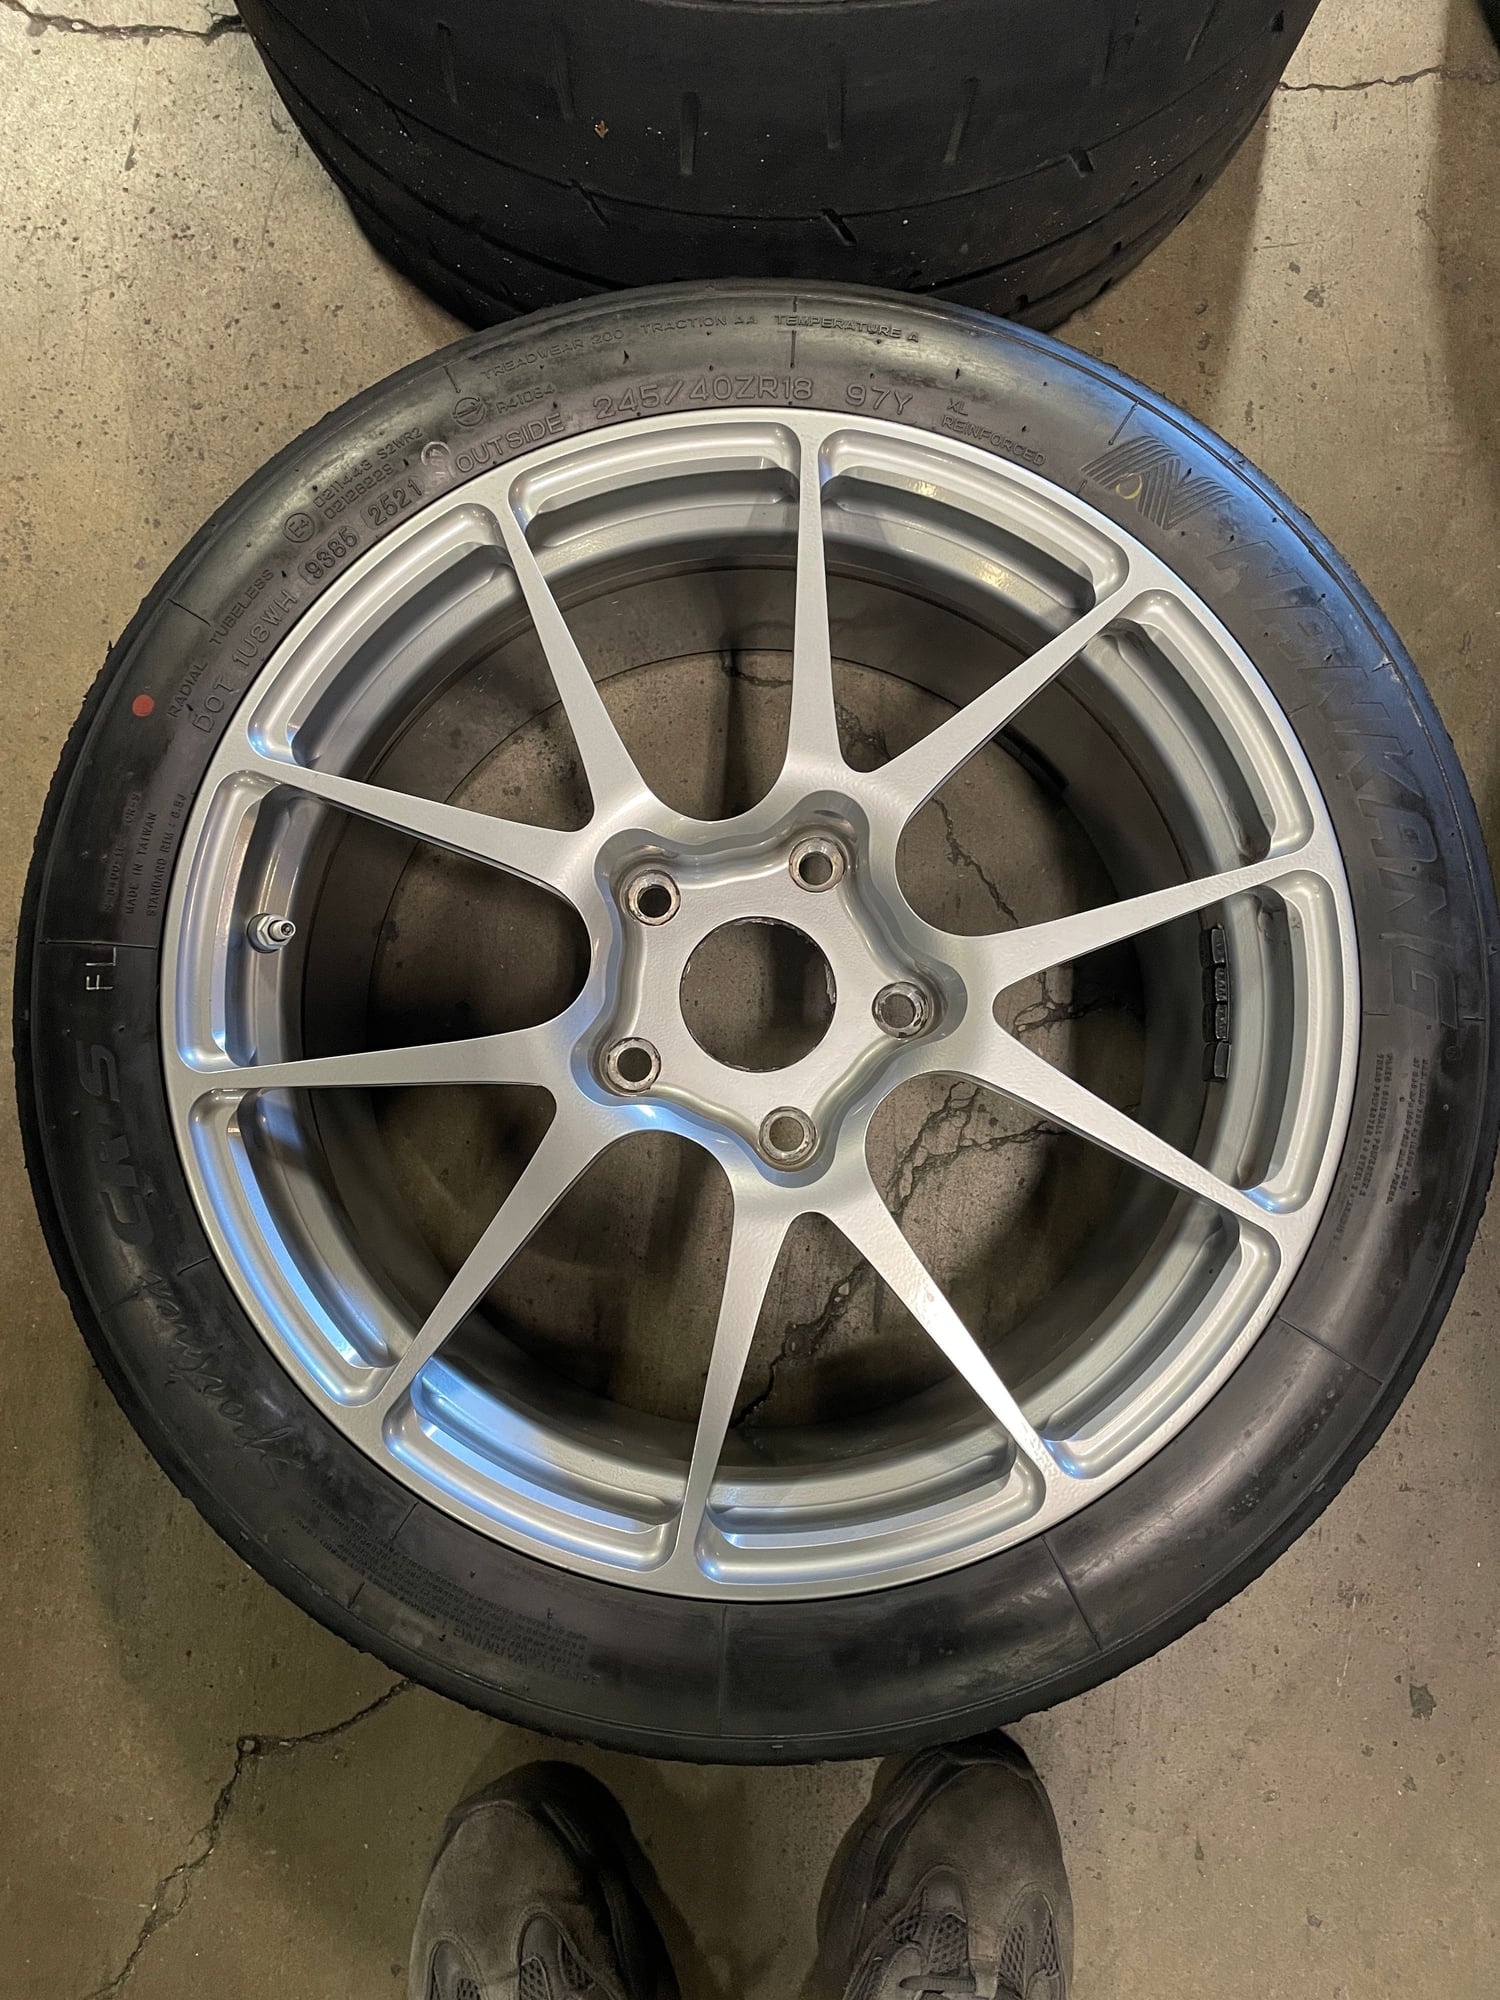 Wheels and Tires/Axles - FS: Forgeline GA1R 997/GT3 Narrow Body Fitment - Used - Hayward, CA 94545, United States